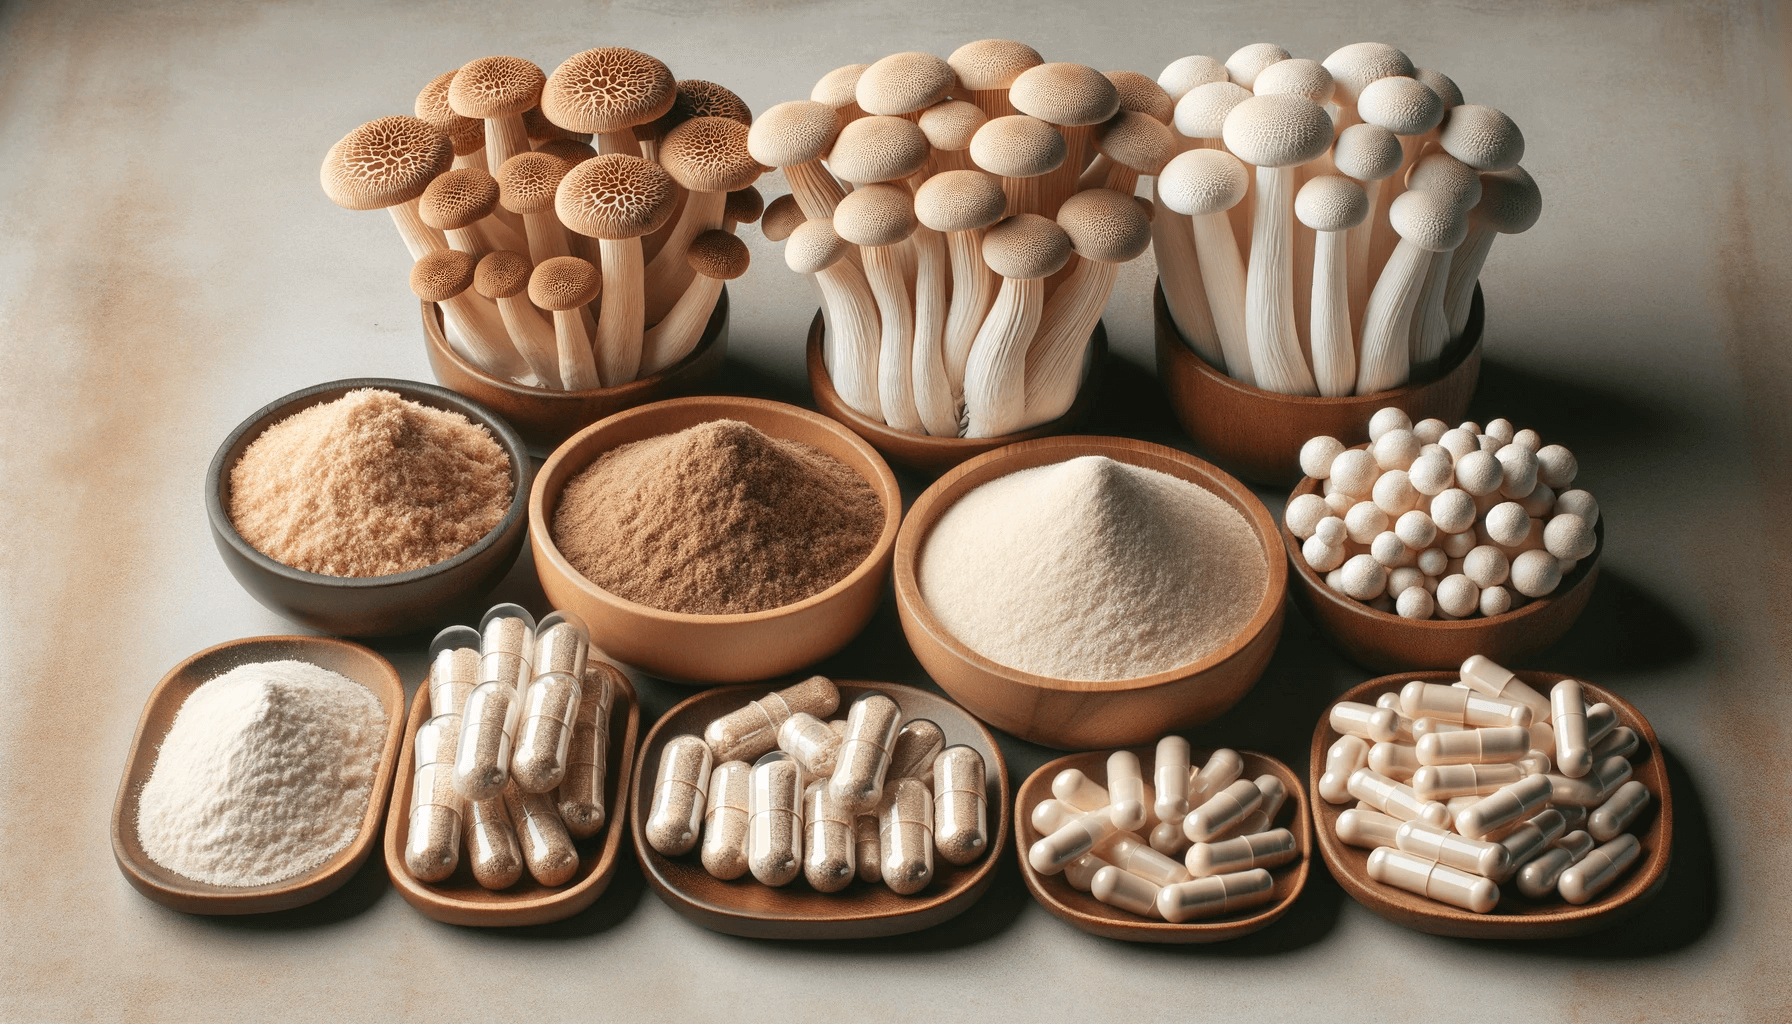 Assorted Lion's Mane mushroom products displayed side by side, including whole mushrooms, powder, and capsules, to illustrate the variety of ways to integrate this nootropic into your diet